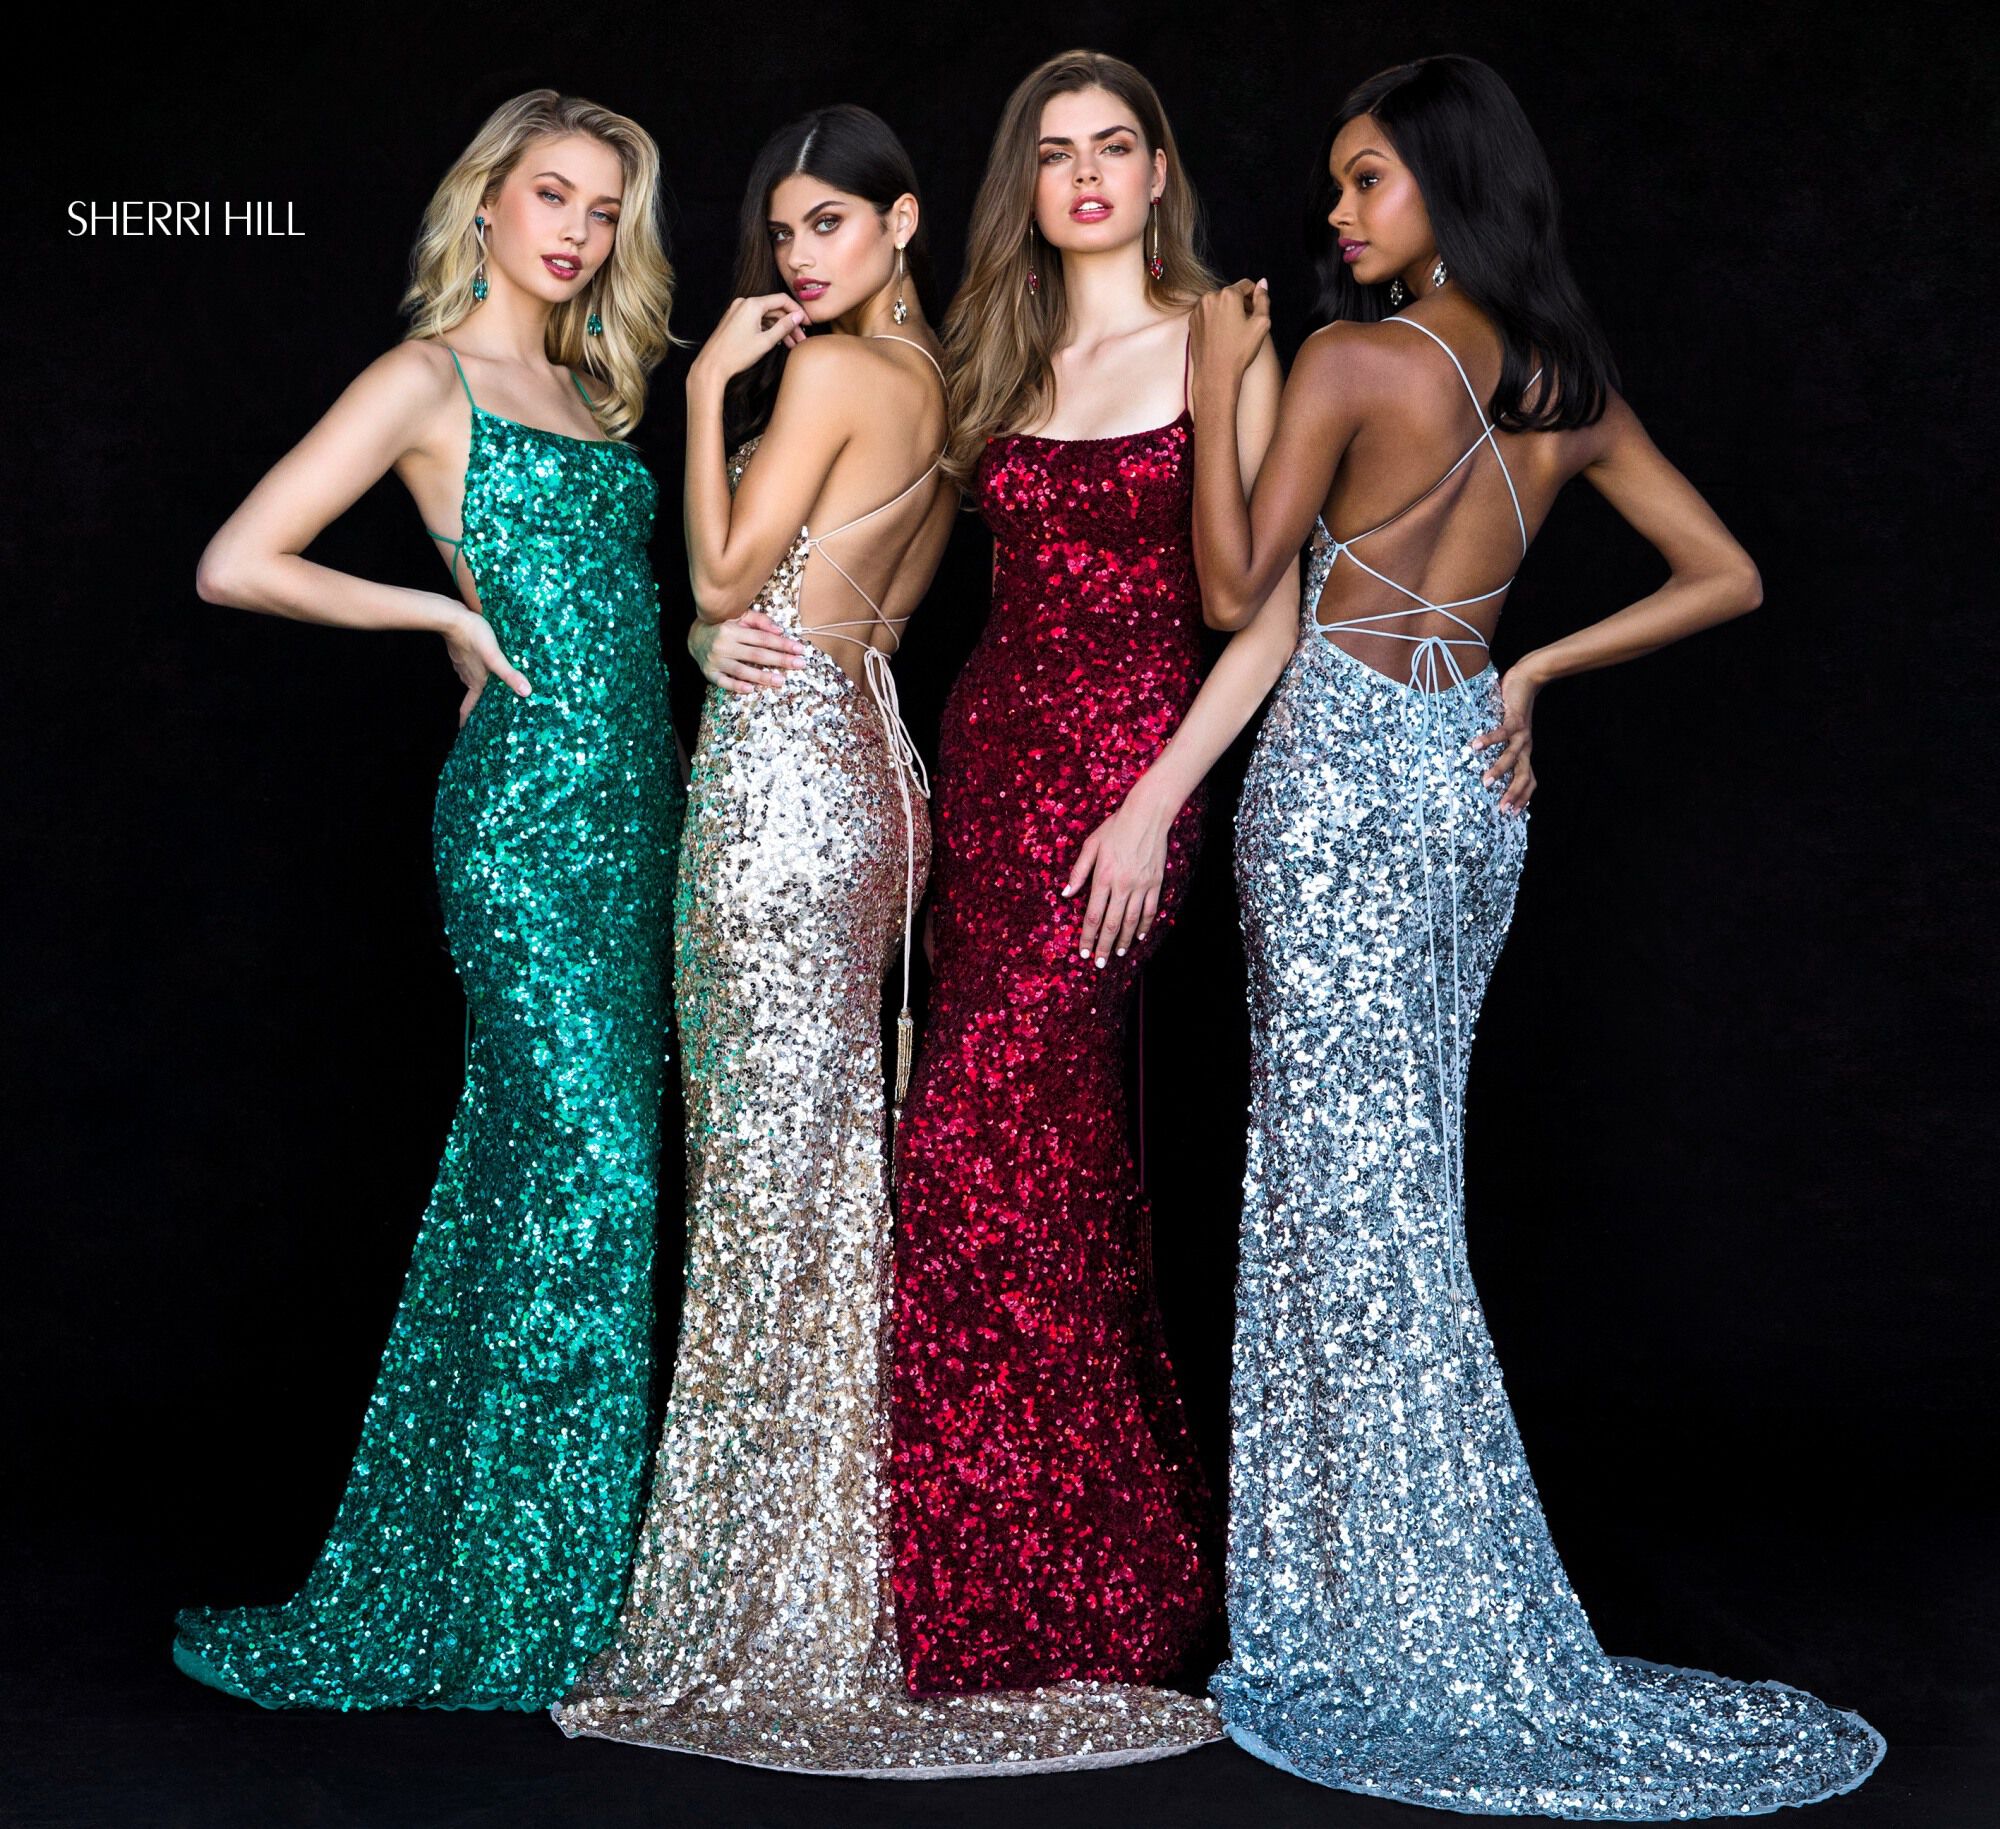 style № 51783 designed by SherriHill